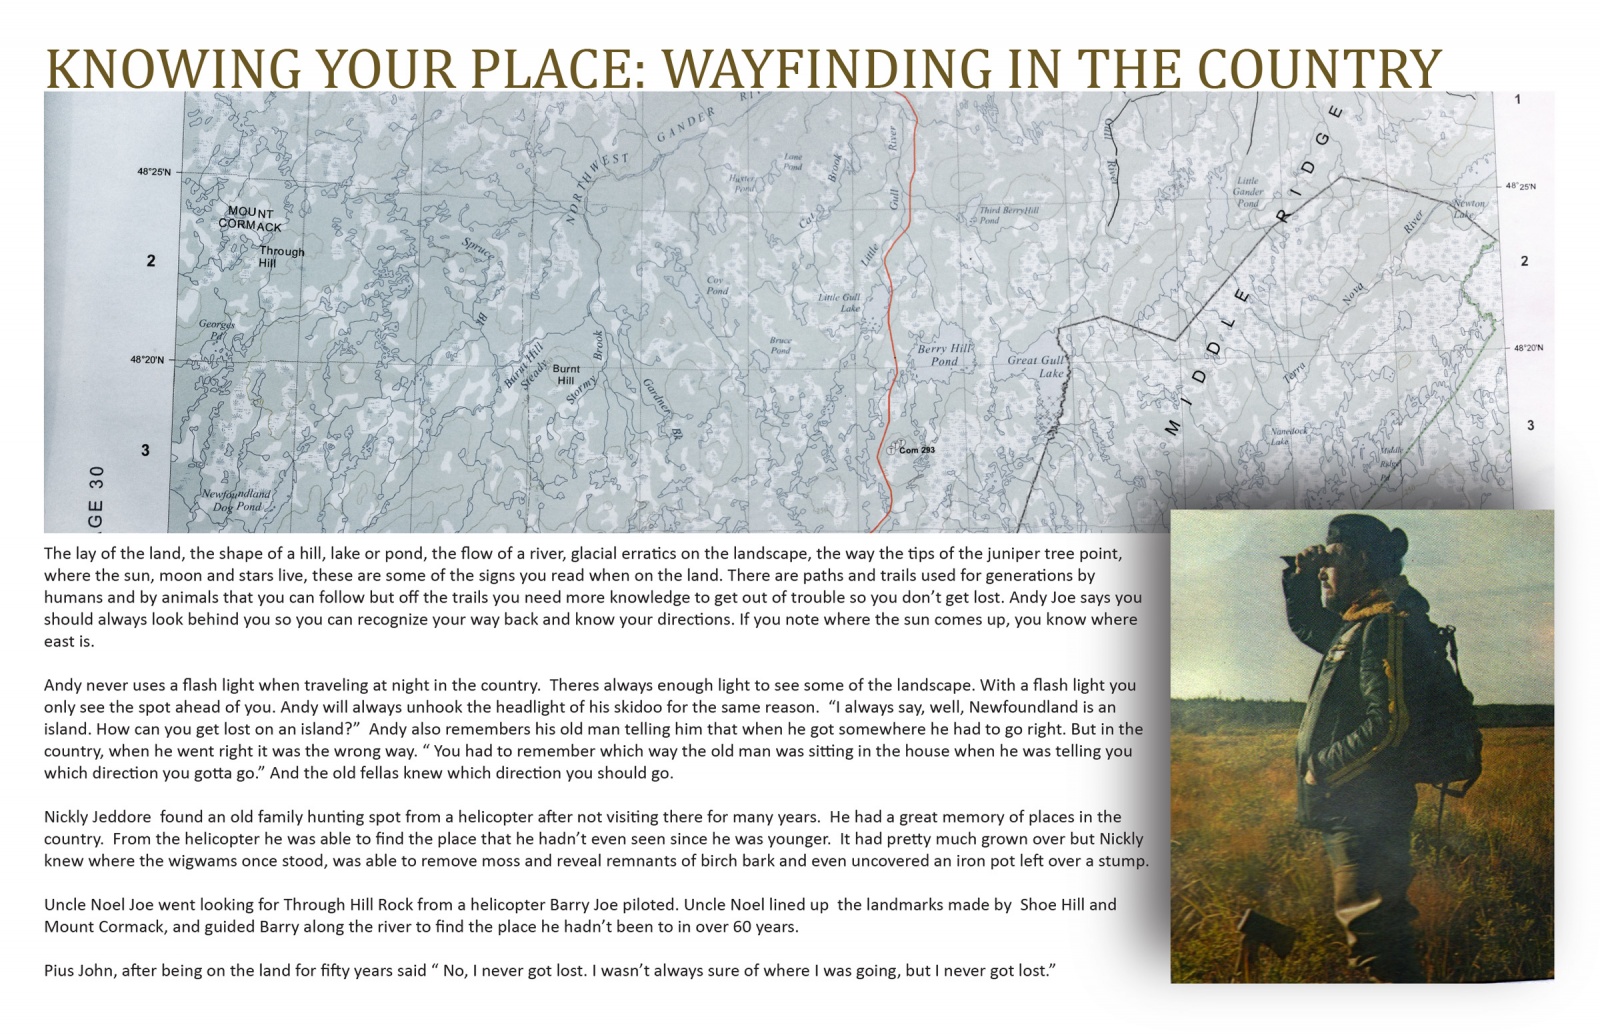 Knowing Your Place: Wayfinding in the Country